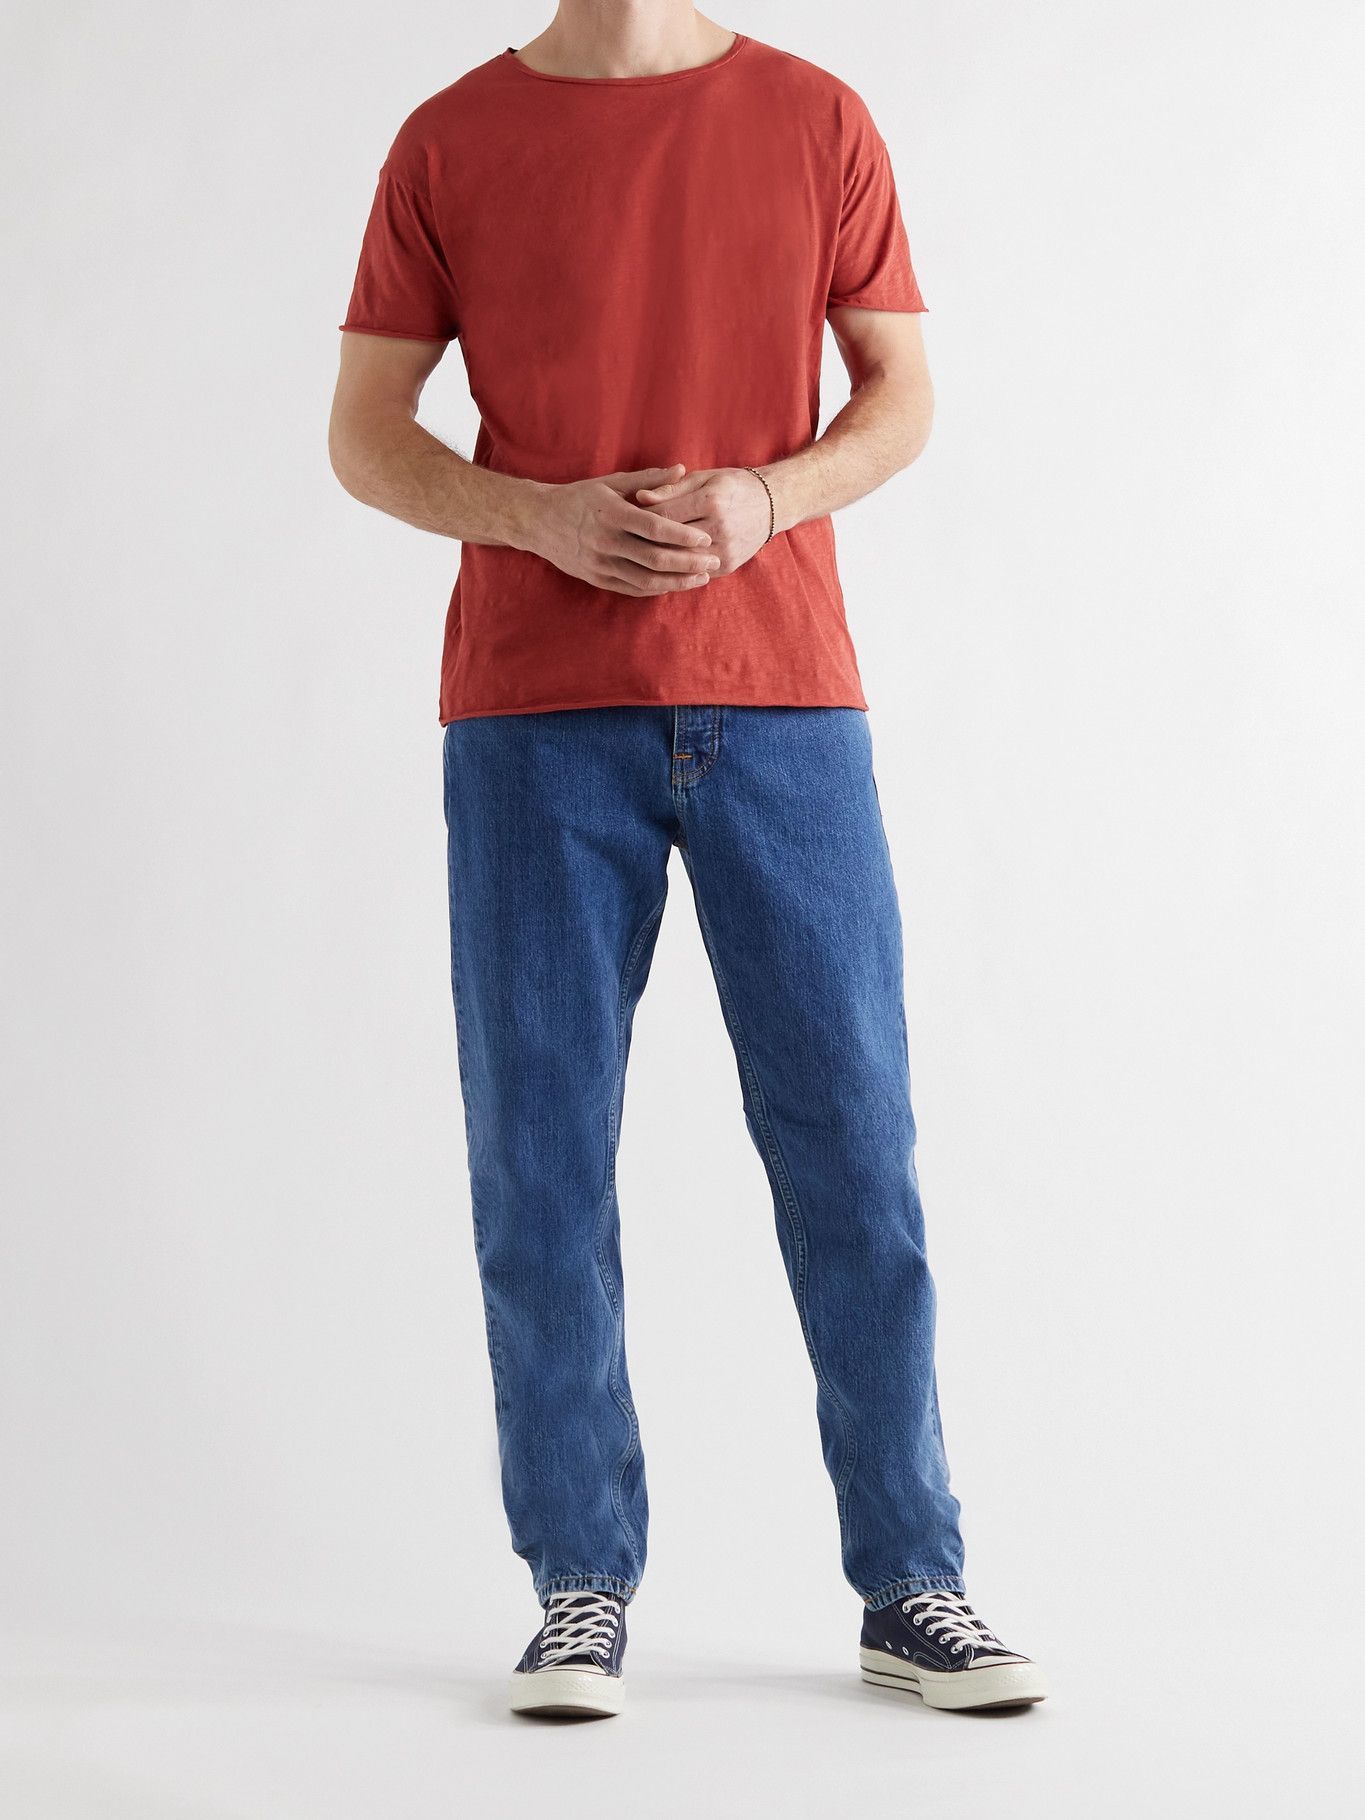 NUDIE JEANS - Roger Slub Organic Cotton-Jersey T-Shirt - Red Nudie Jeans Co